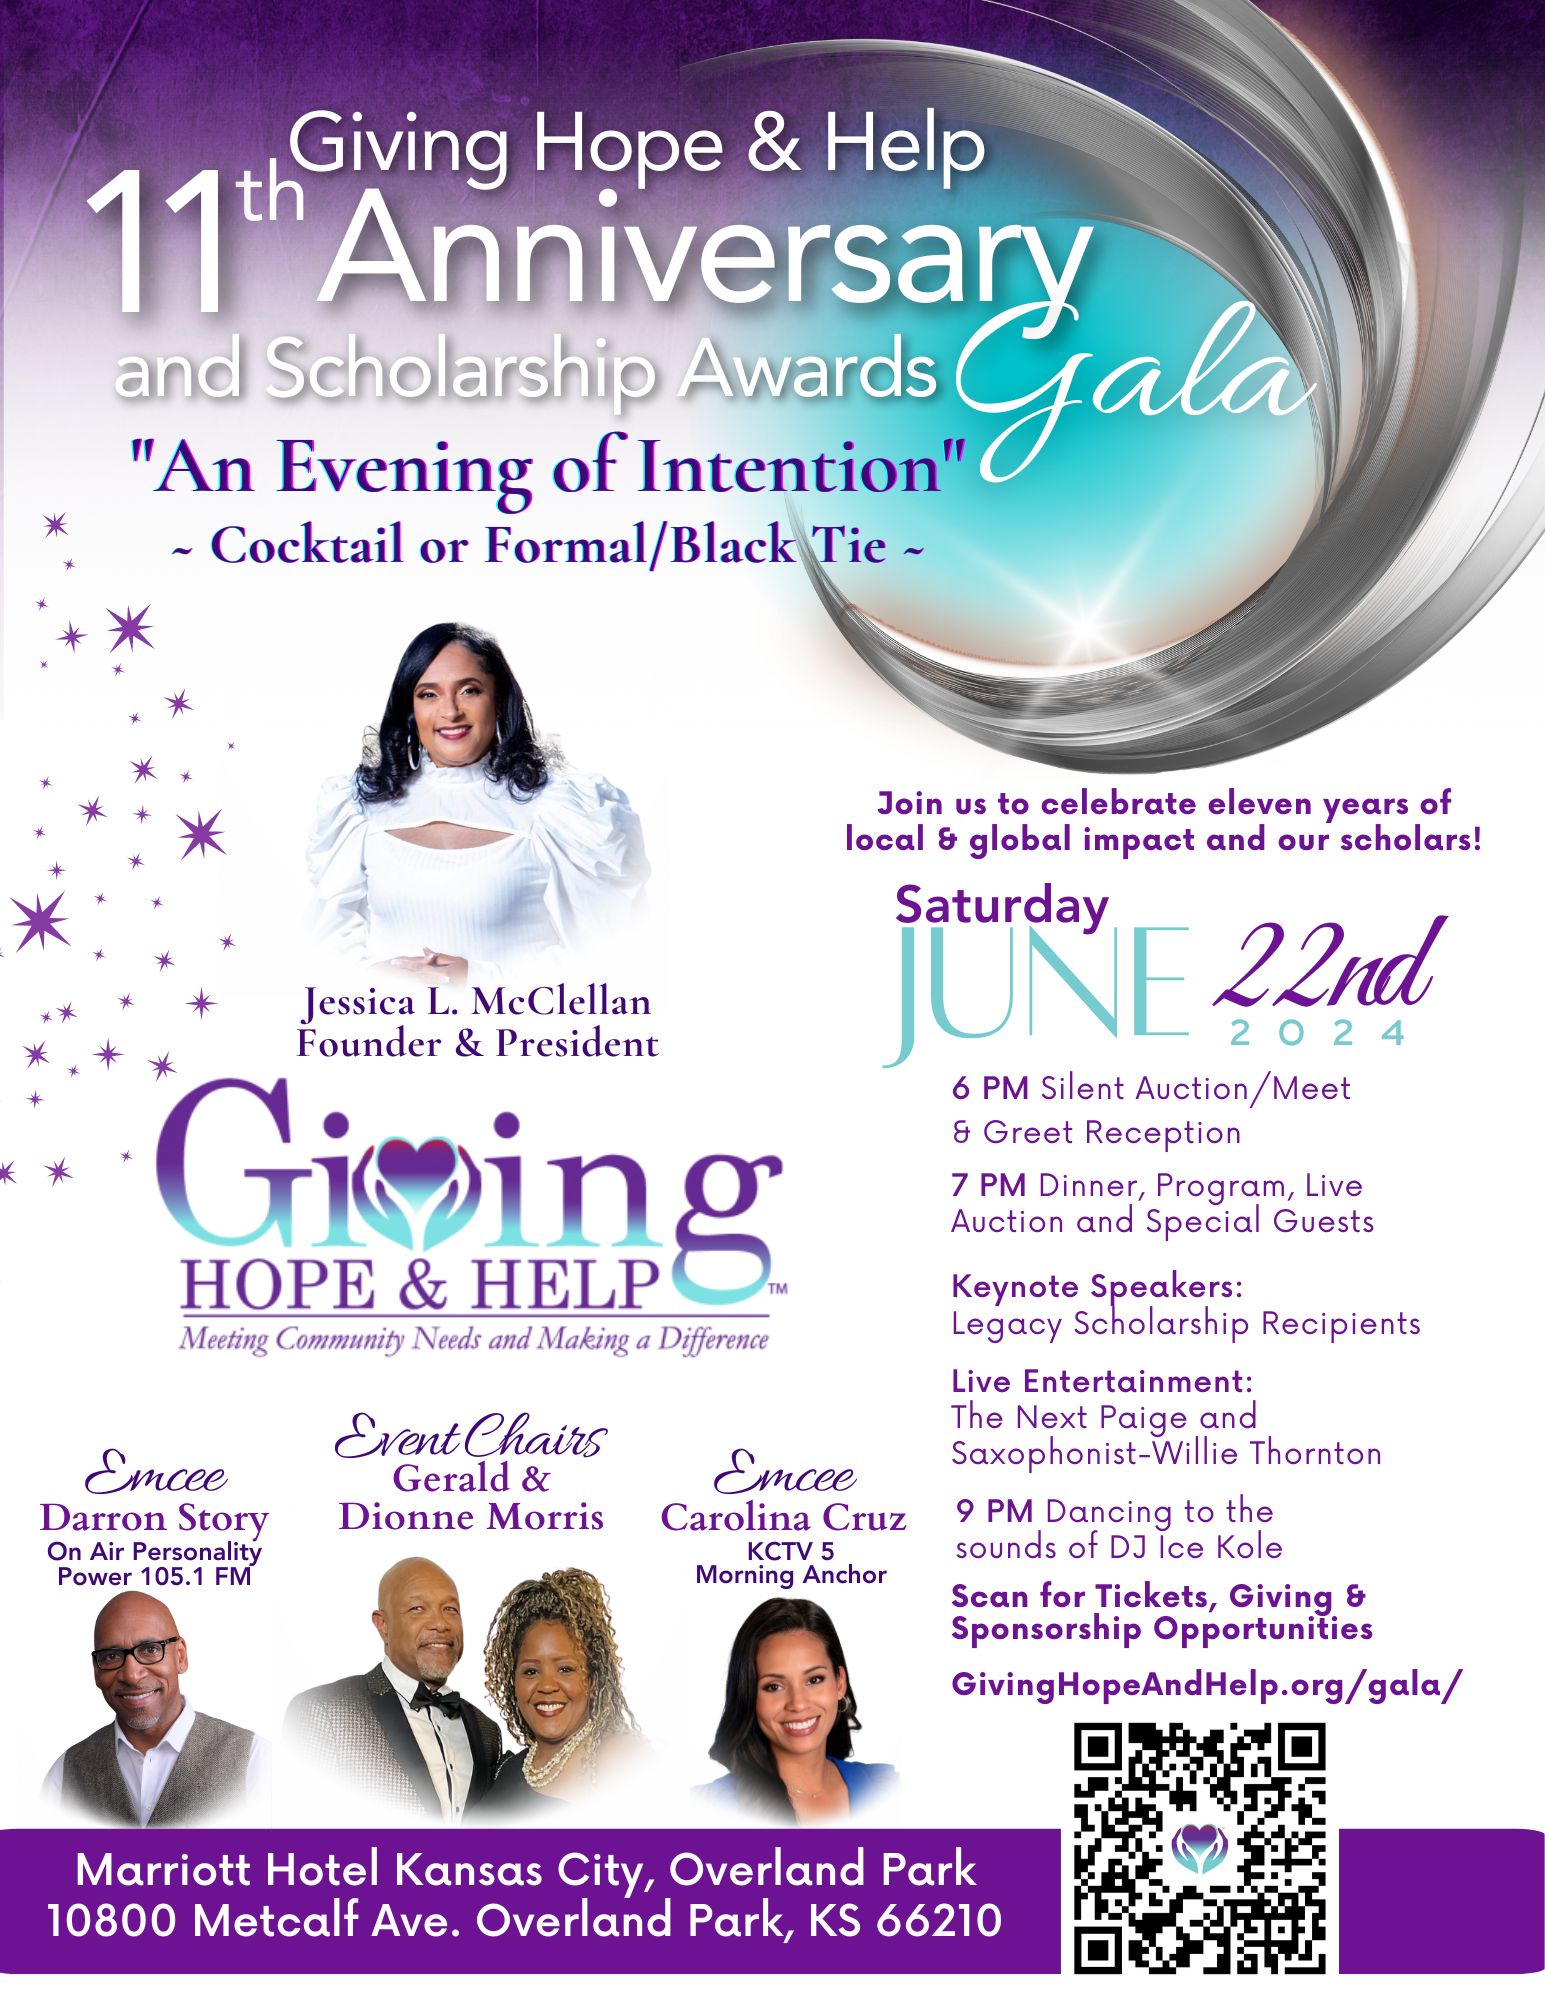 Giving Hope & Help's 11th Anniversary and Scholarship Awards Gala